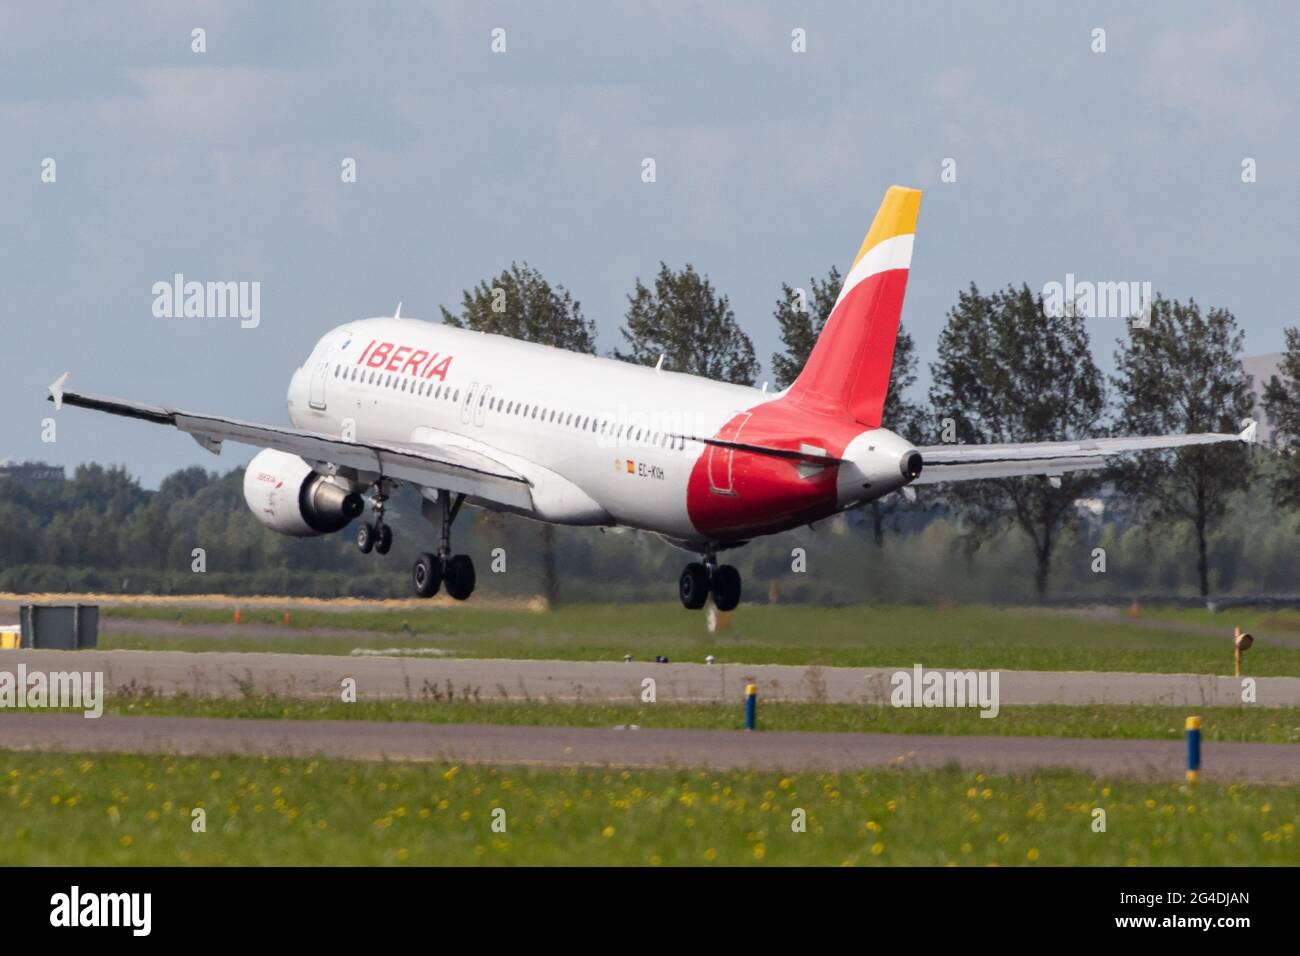 AMSTERDAM, NETHERLANDS - Sep 13, 2020: Iberia (IB / IBE) approaching Amsterdam Schiphol Airport (EHAM/AMS) with an Airbus A320-214 A320 (EC-KOH/2248). Stock Photo